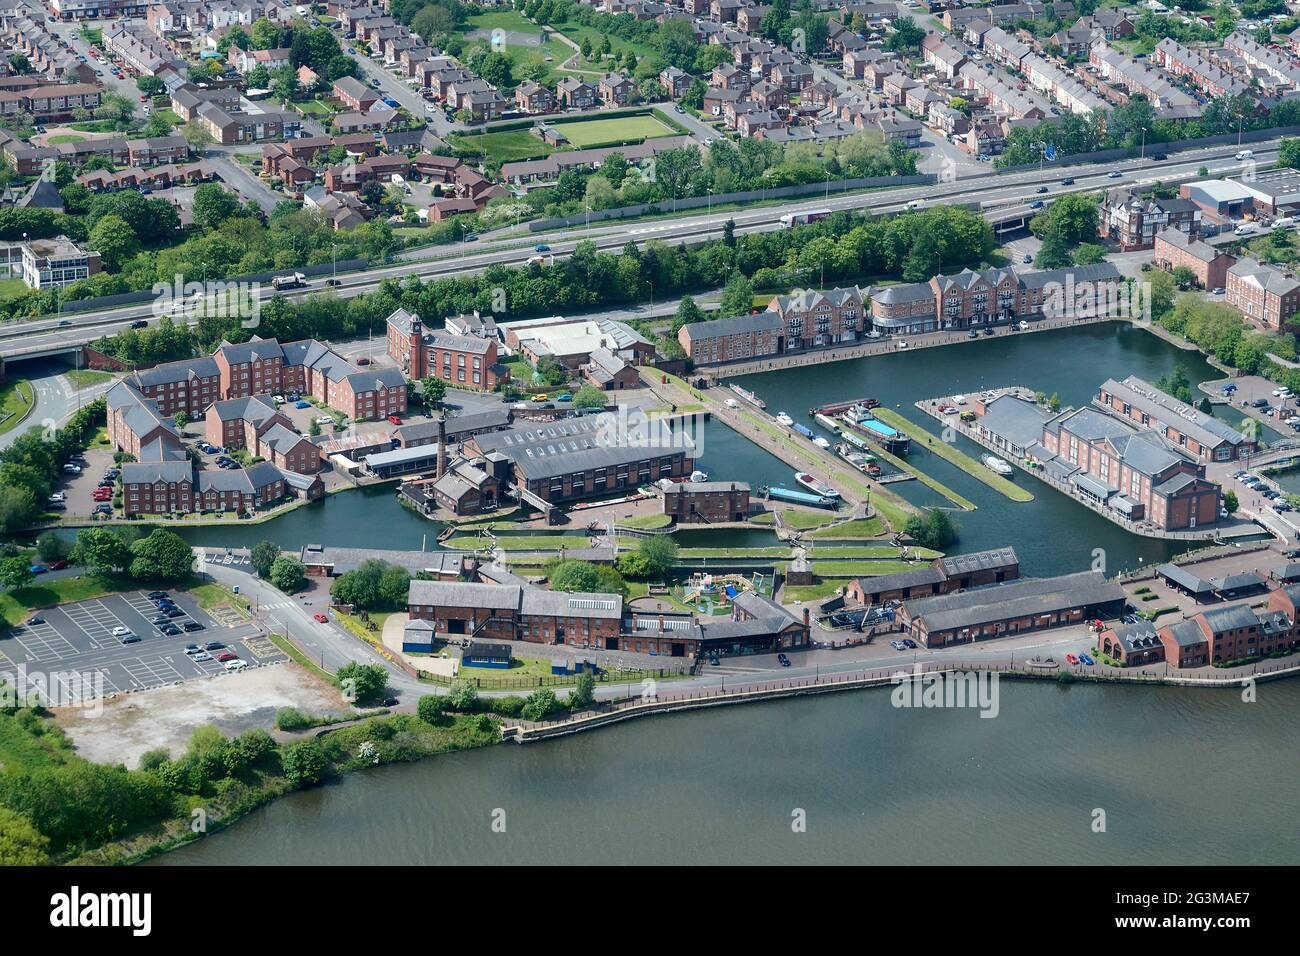 An aerial view of Ellesmere Port national waterways canal museum, North West England, Merseyside, UK Stock Photo